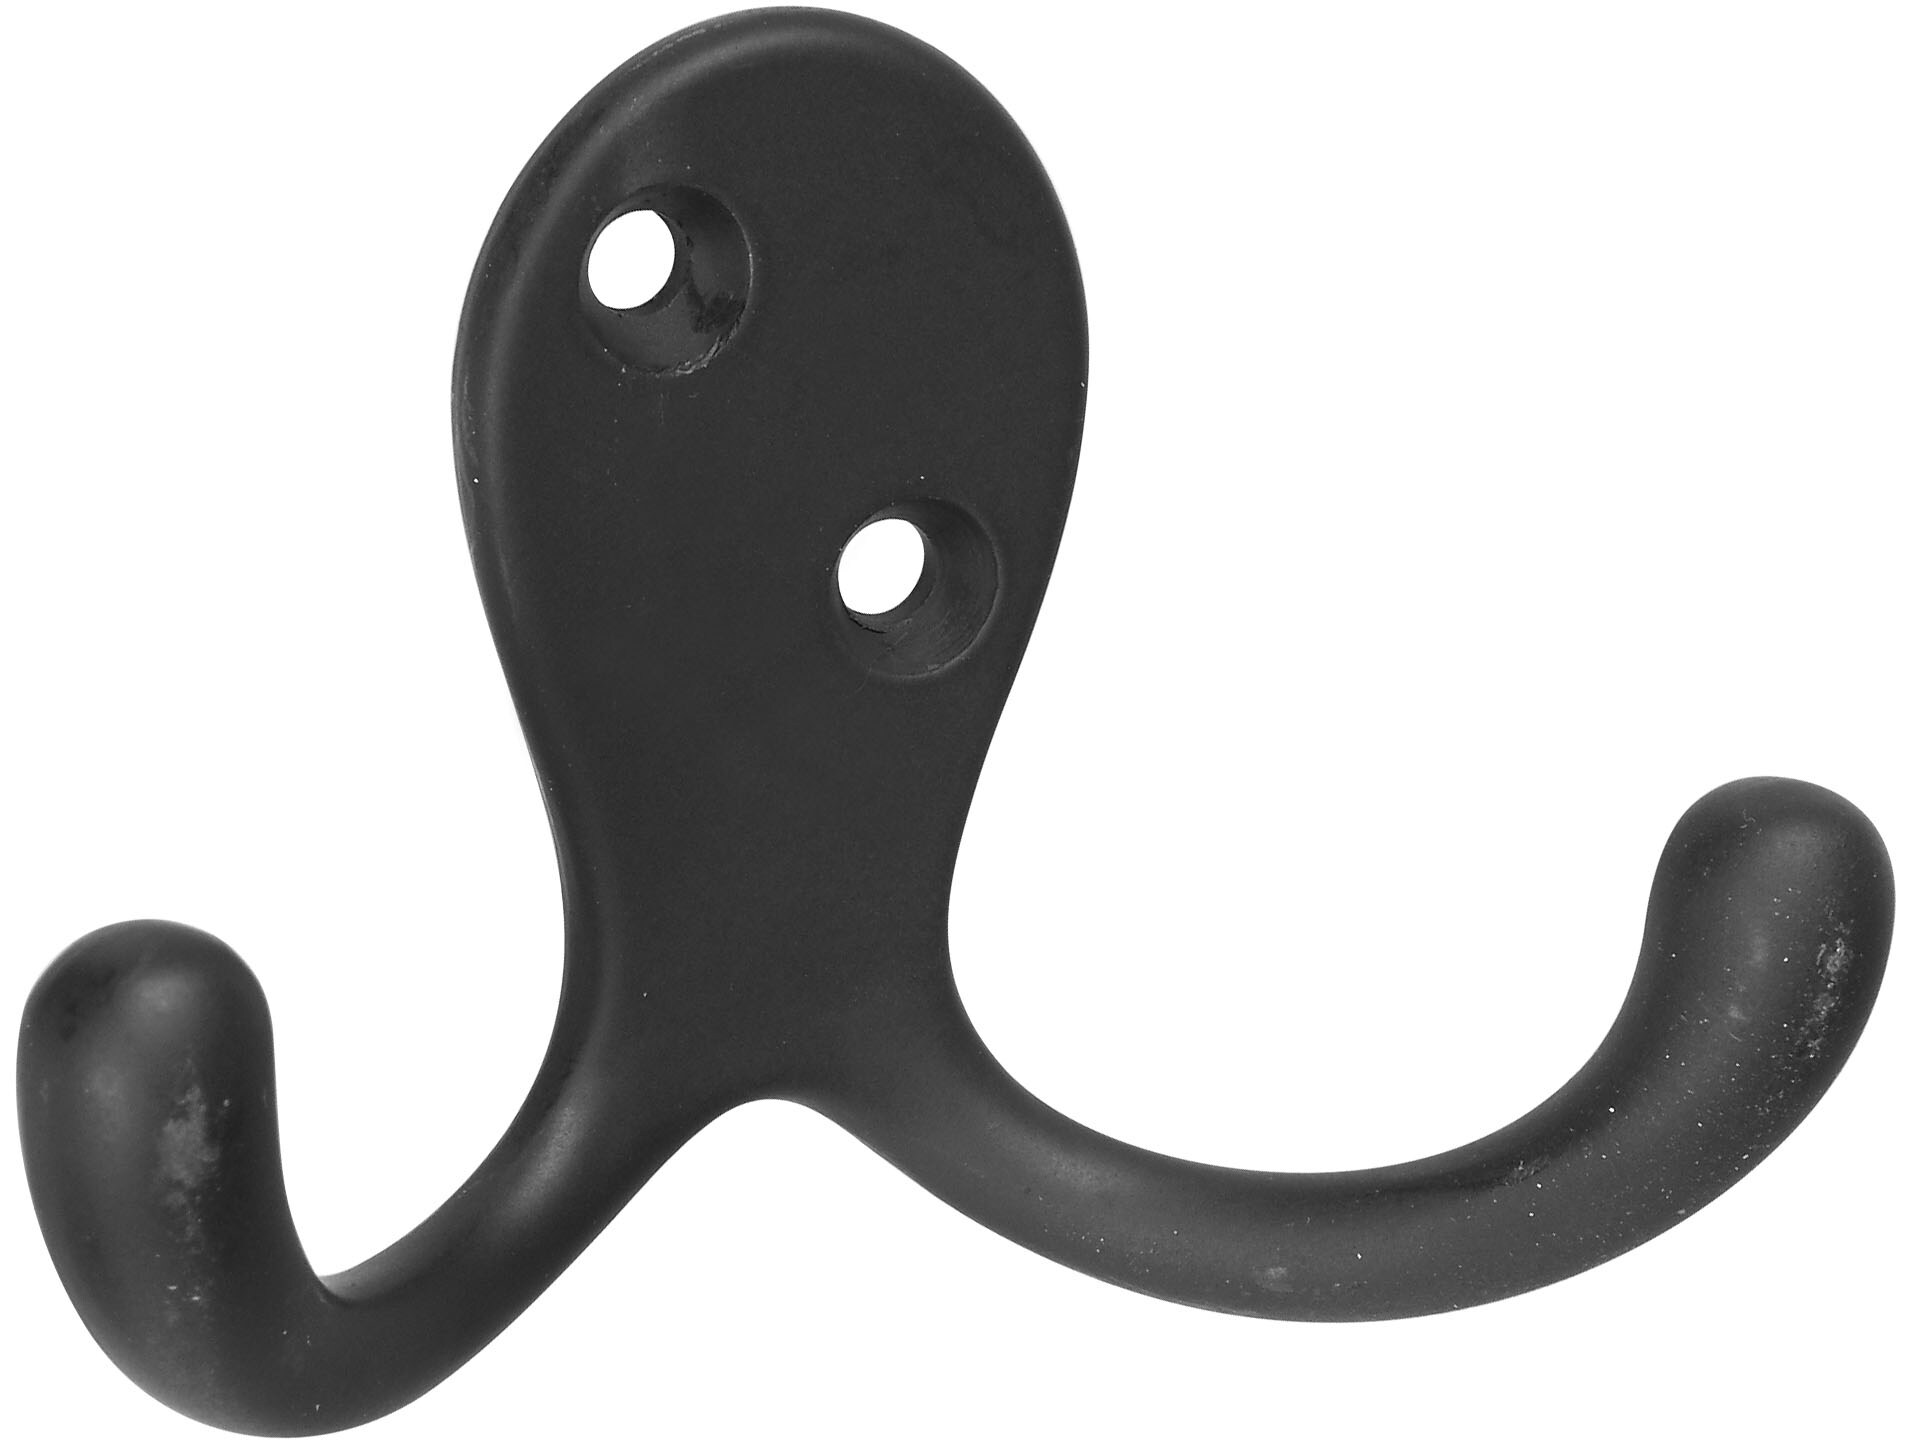 Stanley-National Hardware Oil-Rubbed Bronze Decorative Wall Hook at ...